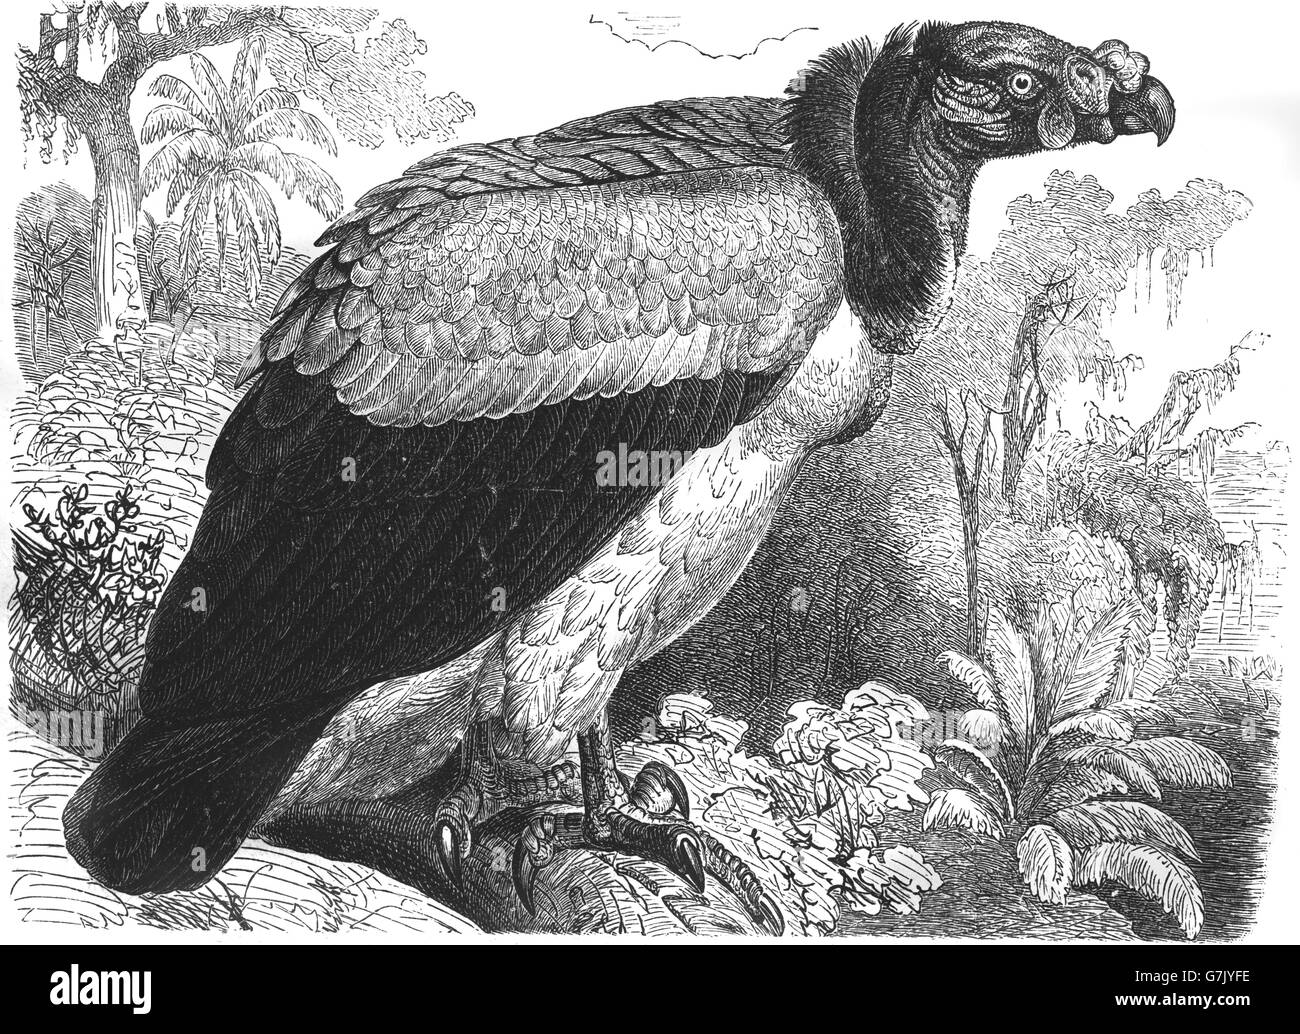 King vulture, Sarcoramphus papa, illustration from book dated 1904 Stock Photo